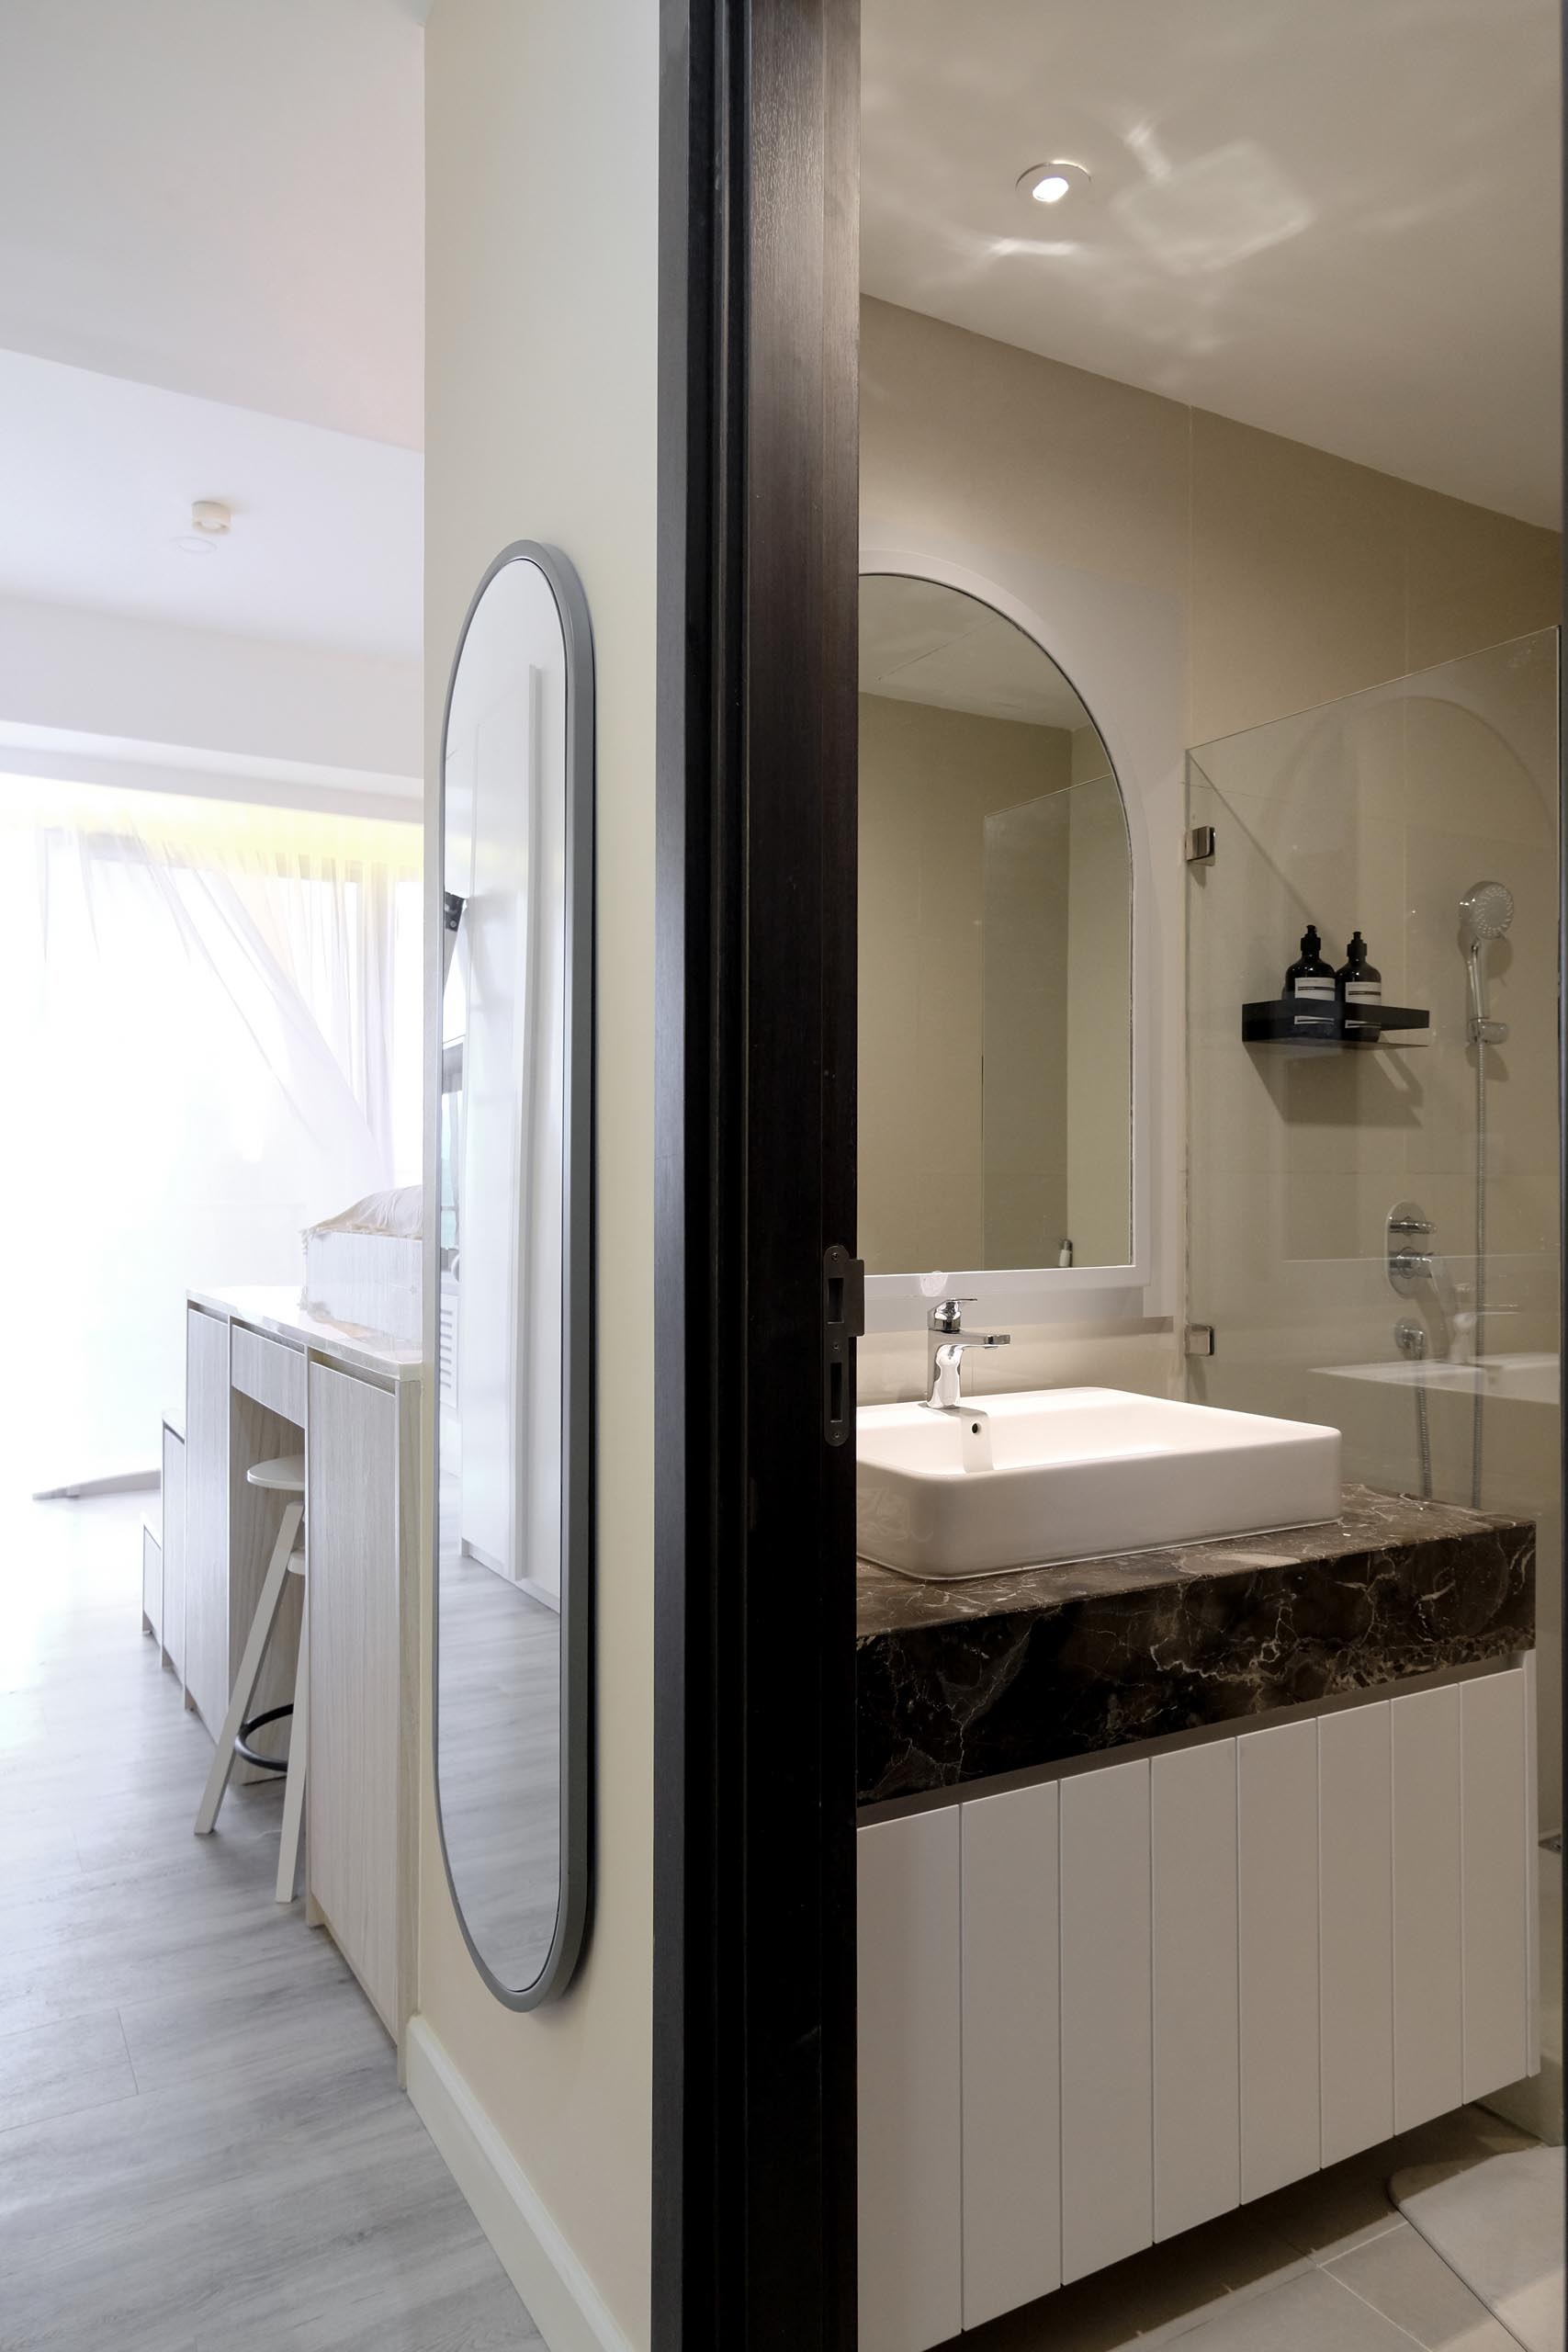 This small bathroom, which is located by the front door, has a modern vanity, a walk-in shower, and an arched mirror which matches the wall mirror in the hallway.